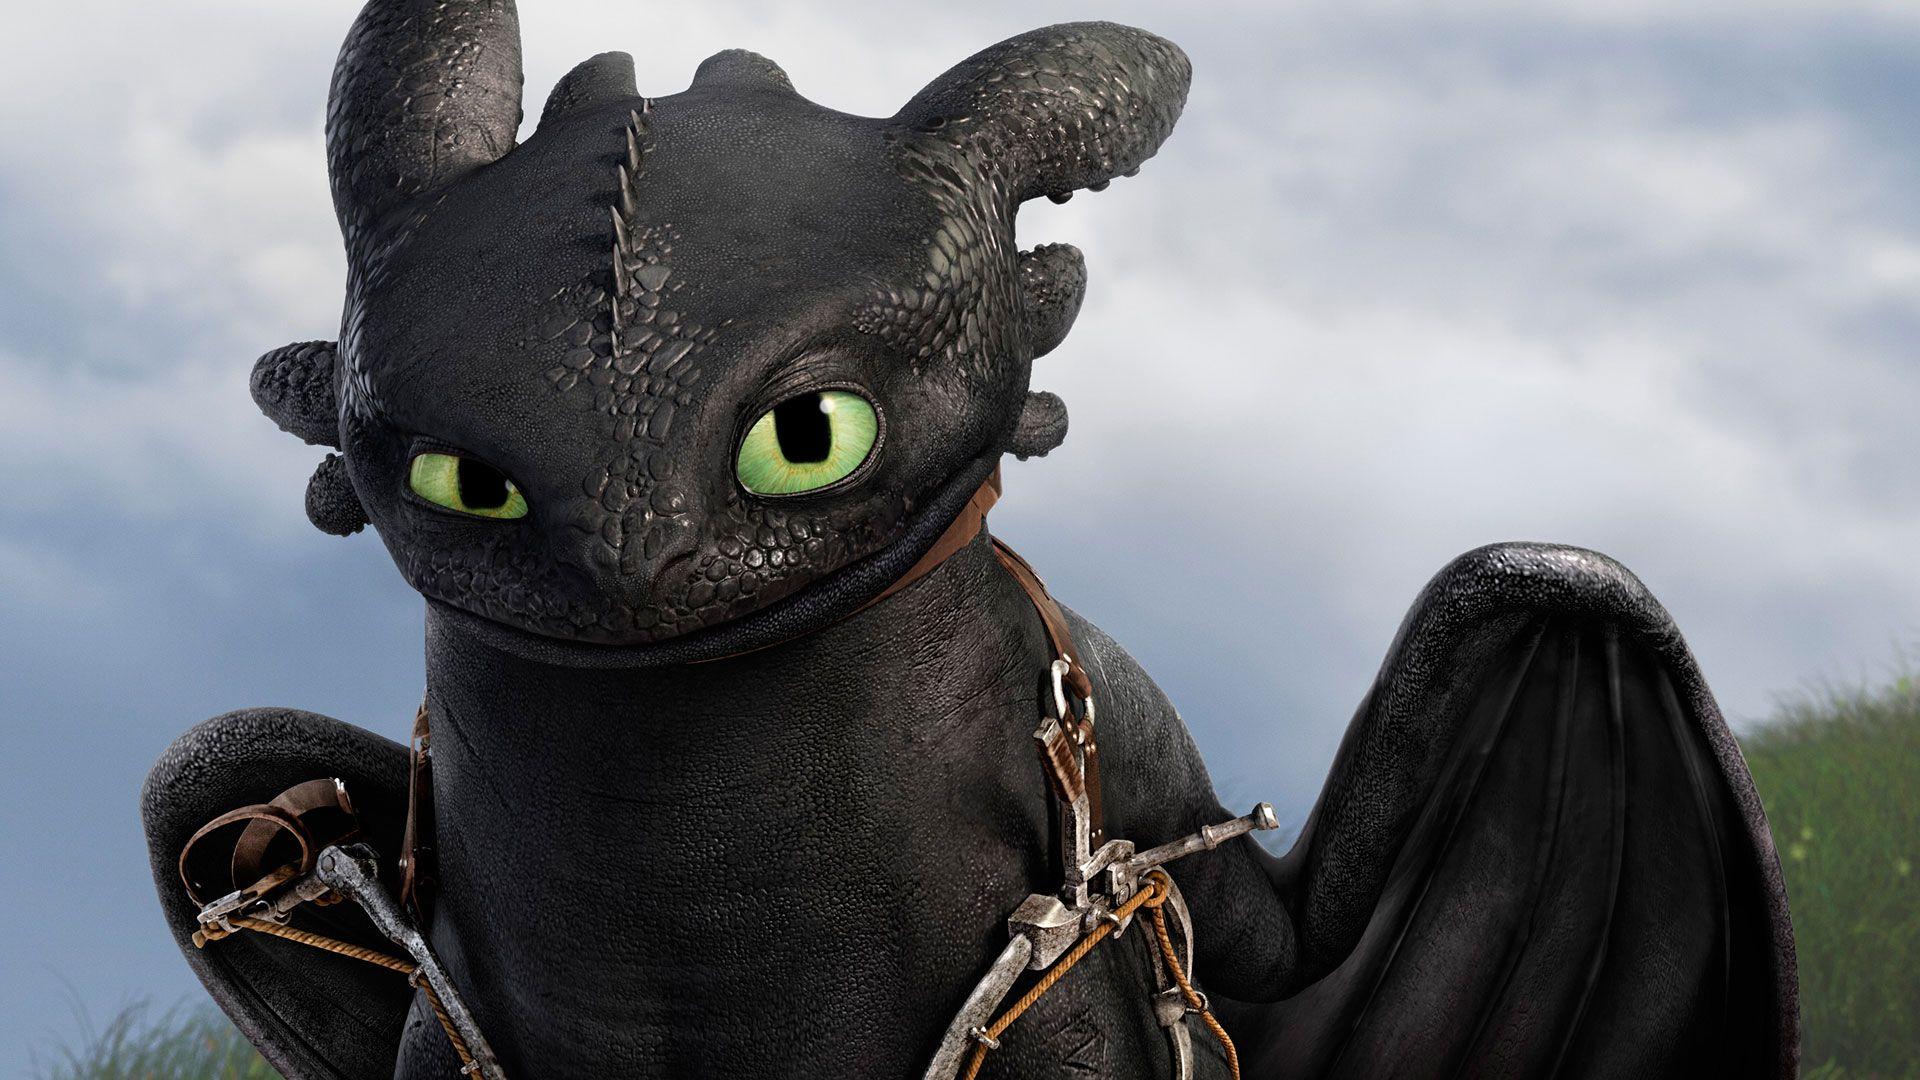 Toothless How To Train Your Dragon 2 Wallpaper 1920x10801